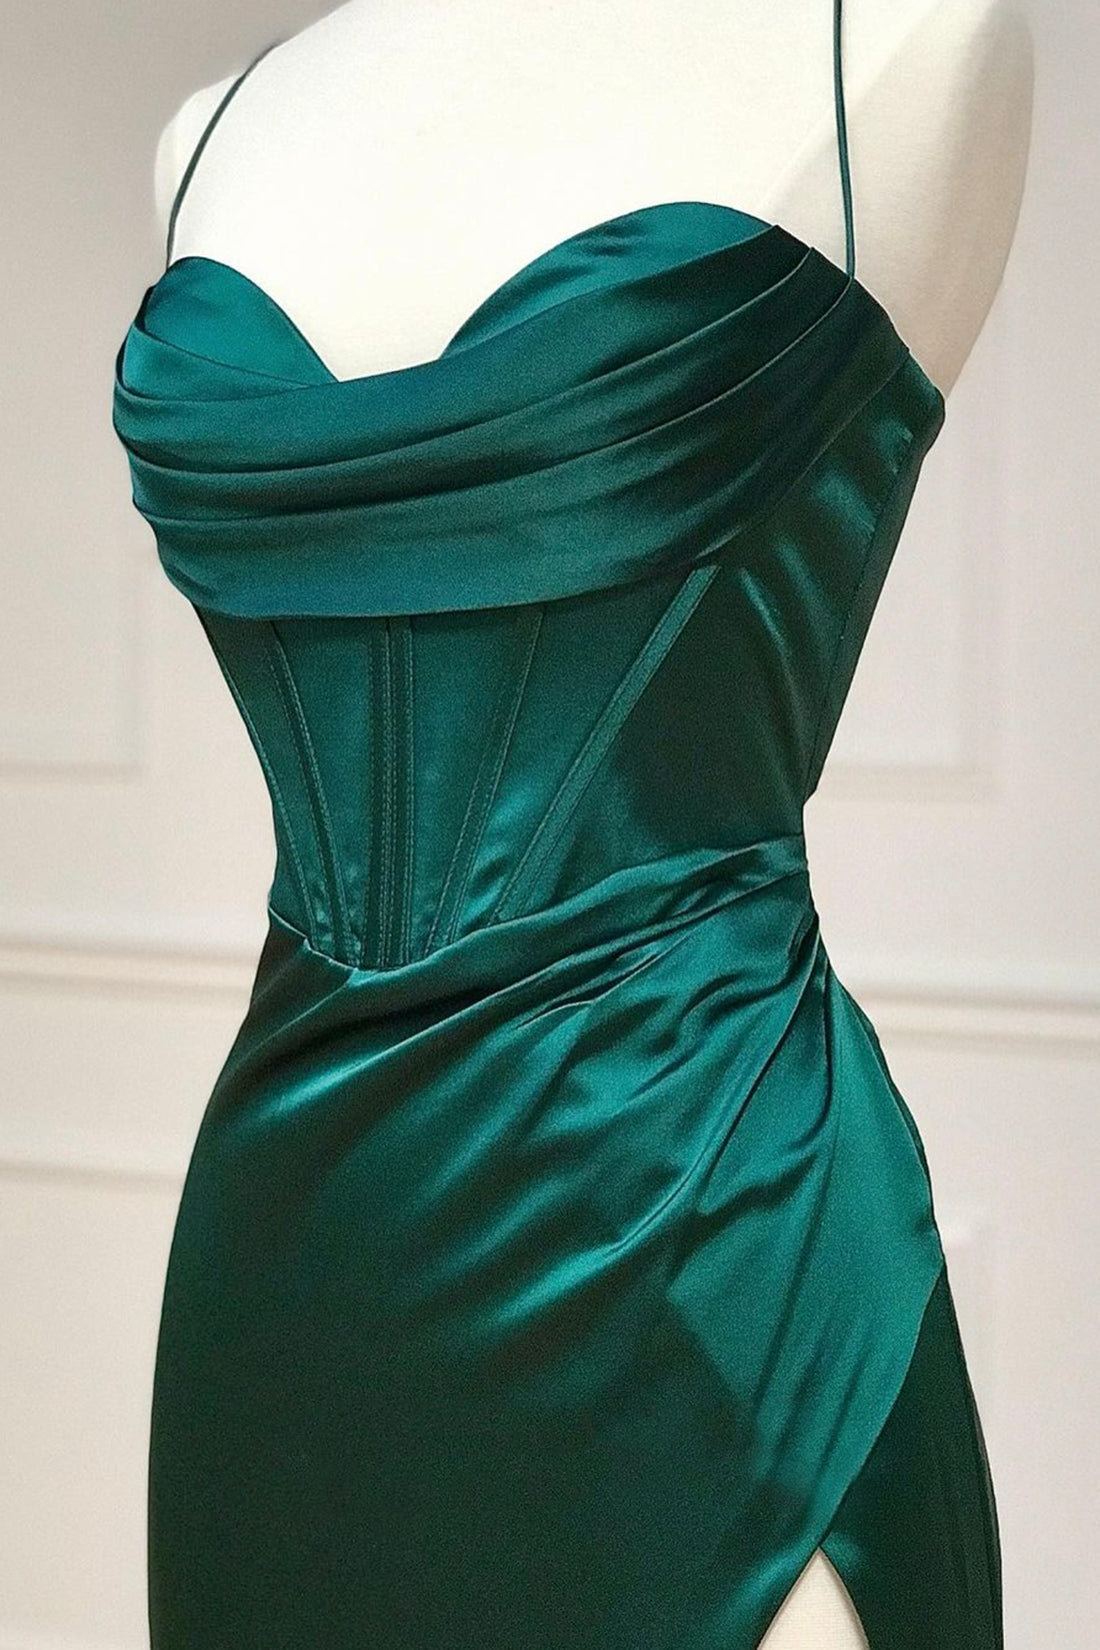 Dress Prom, Green Satin Long Prom Dress, Simple Lace-Up Evening Party Dress